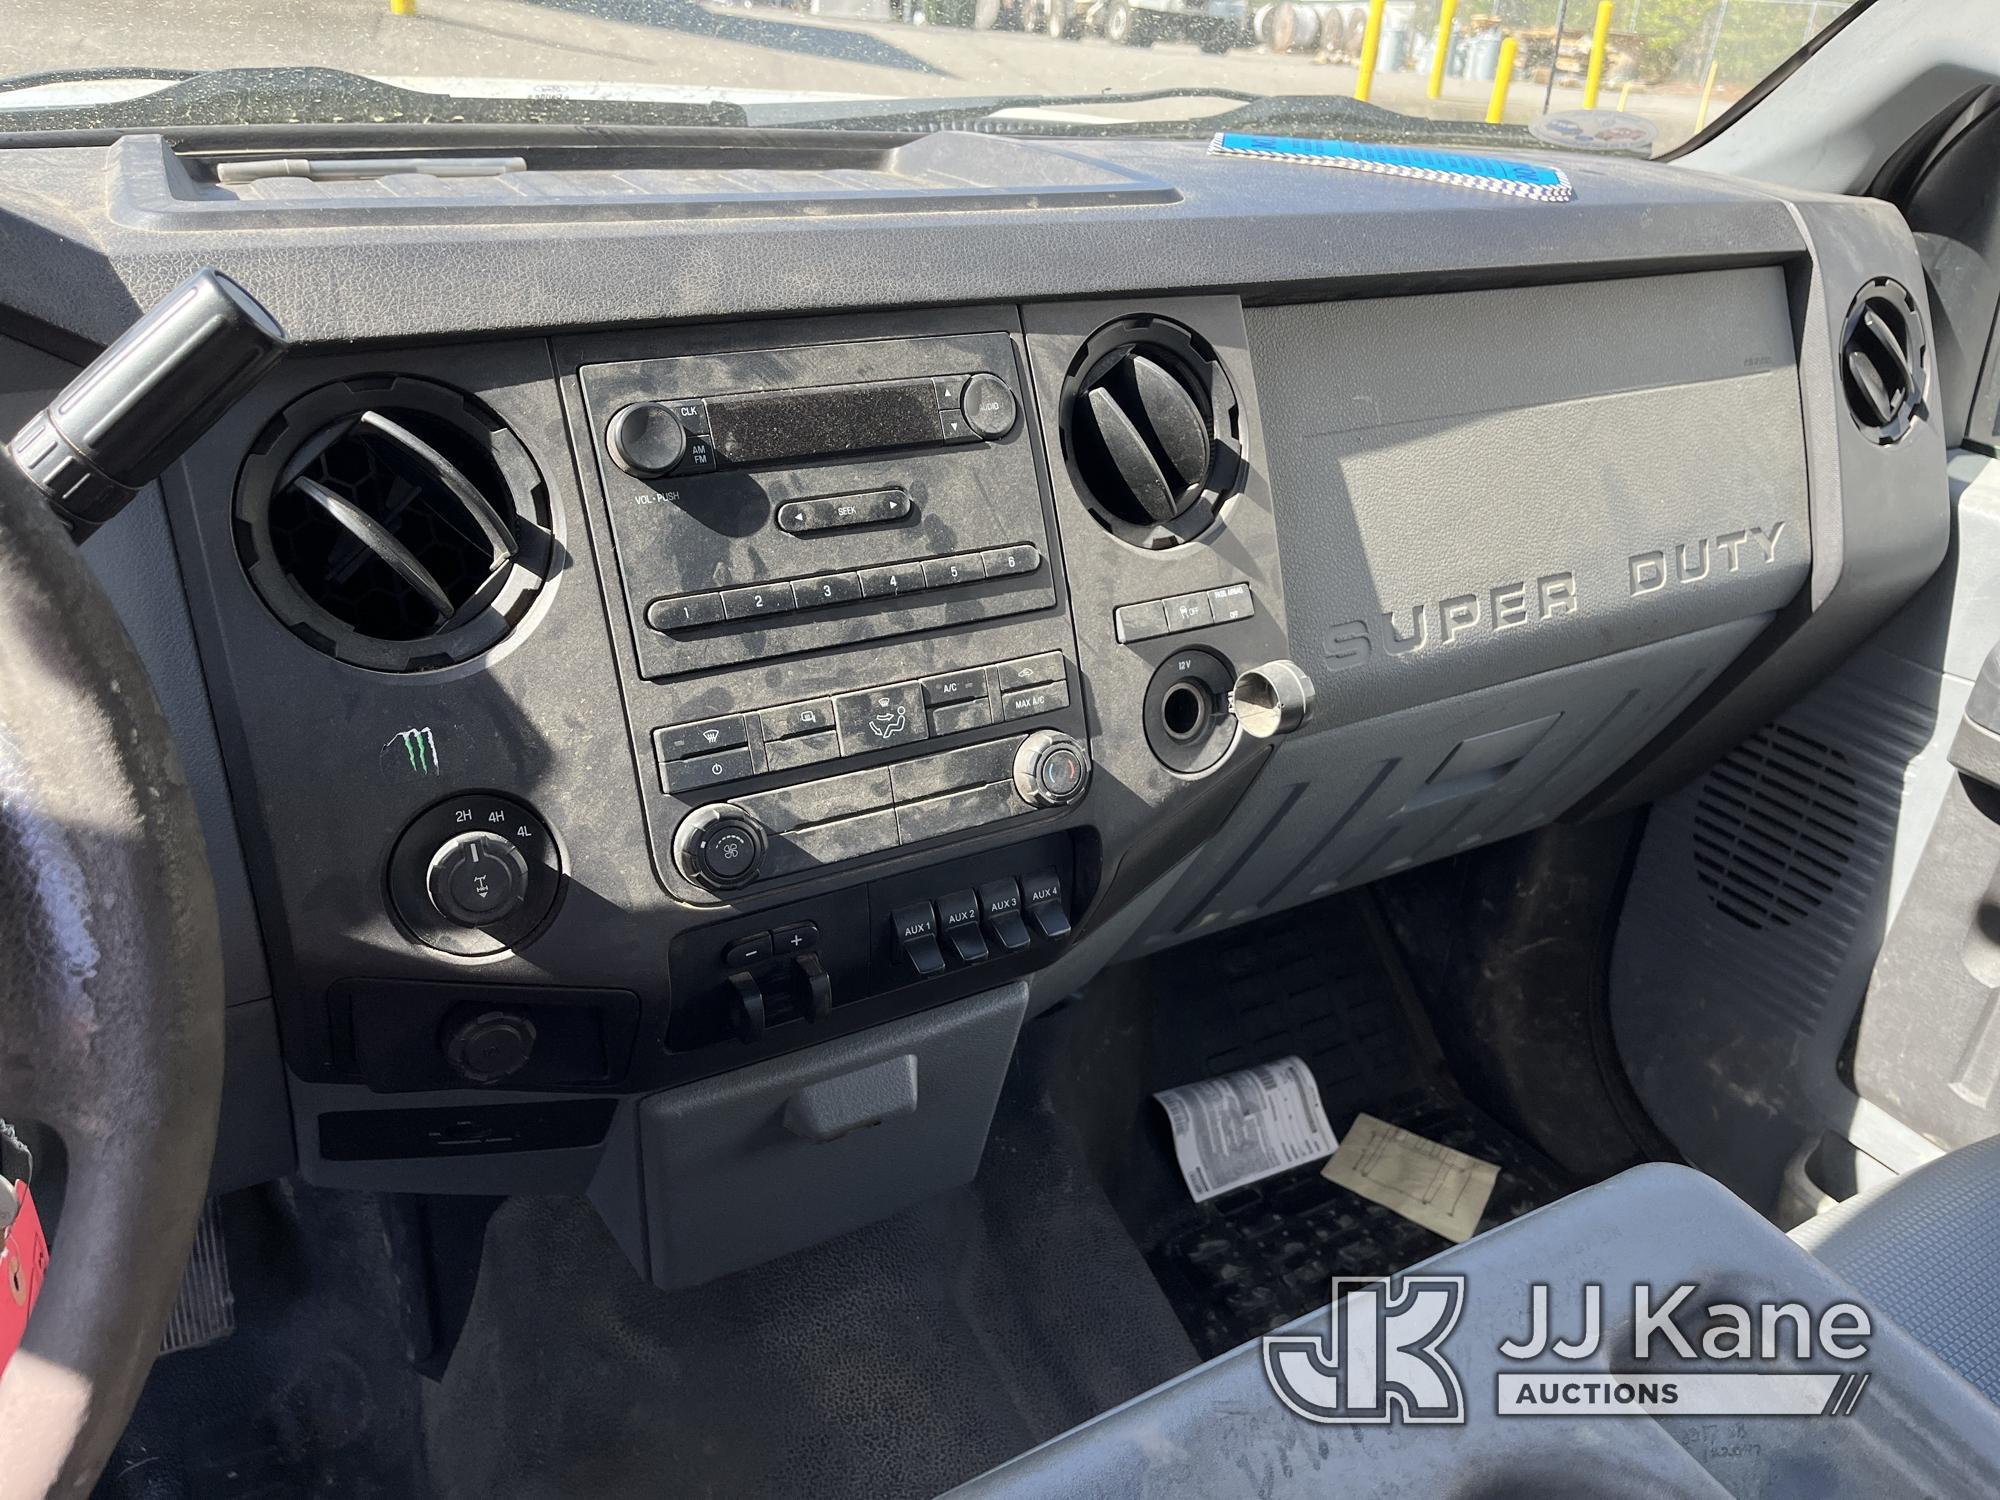 (Waverly, VA) 2011 Ford F350 4x4 Extended-Cab Service Truck Runs & Moves) (Check Engine Light On